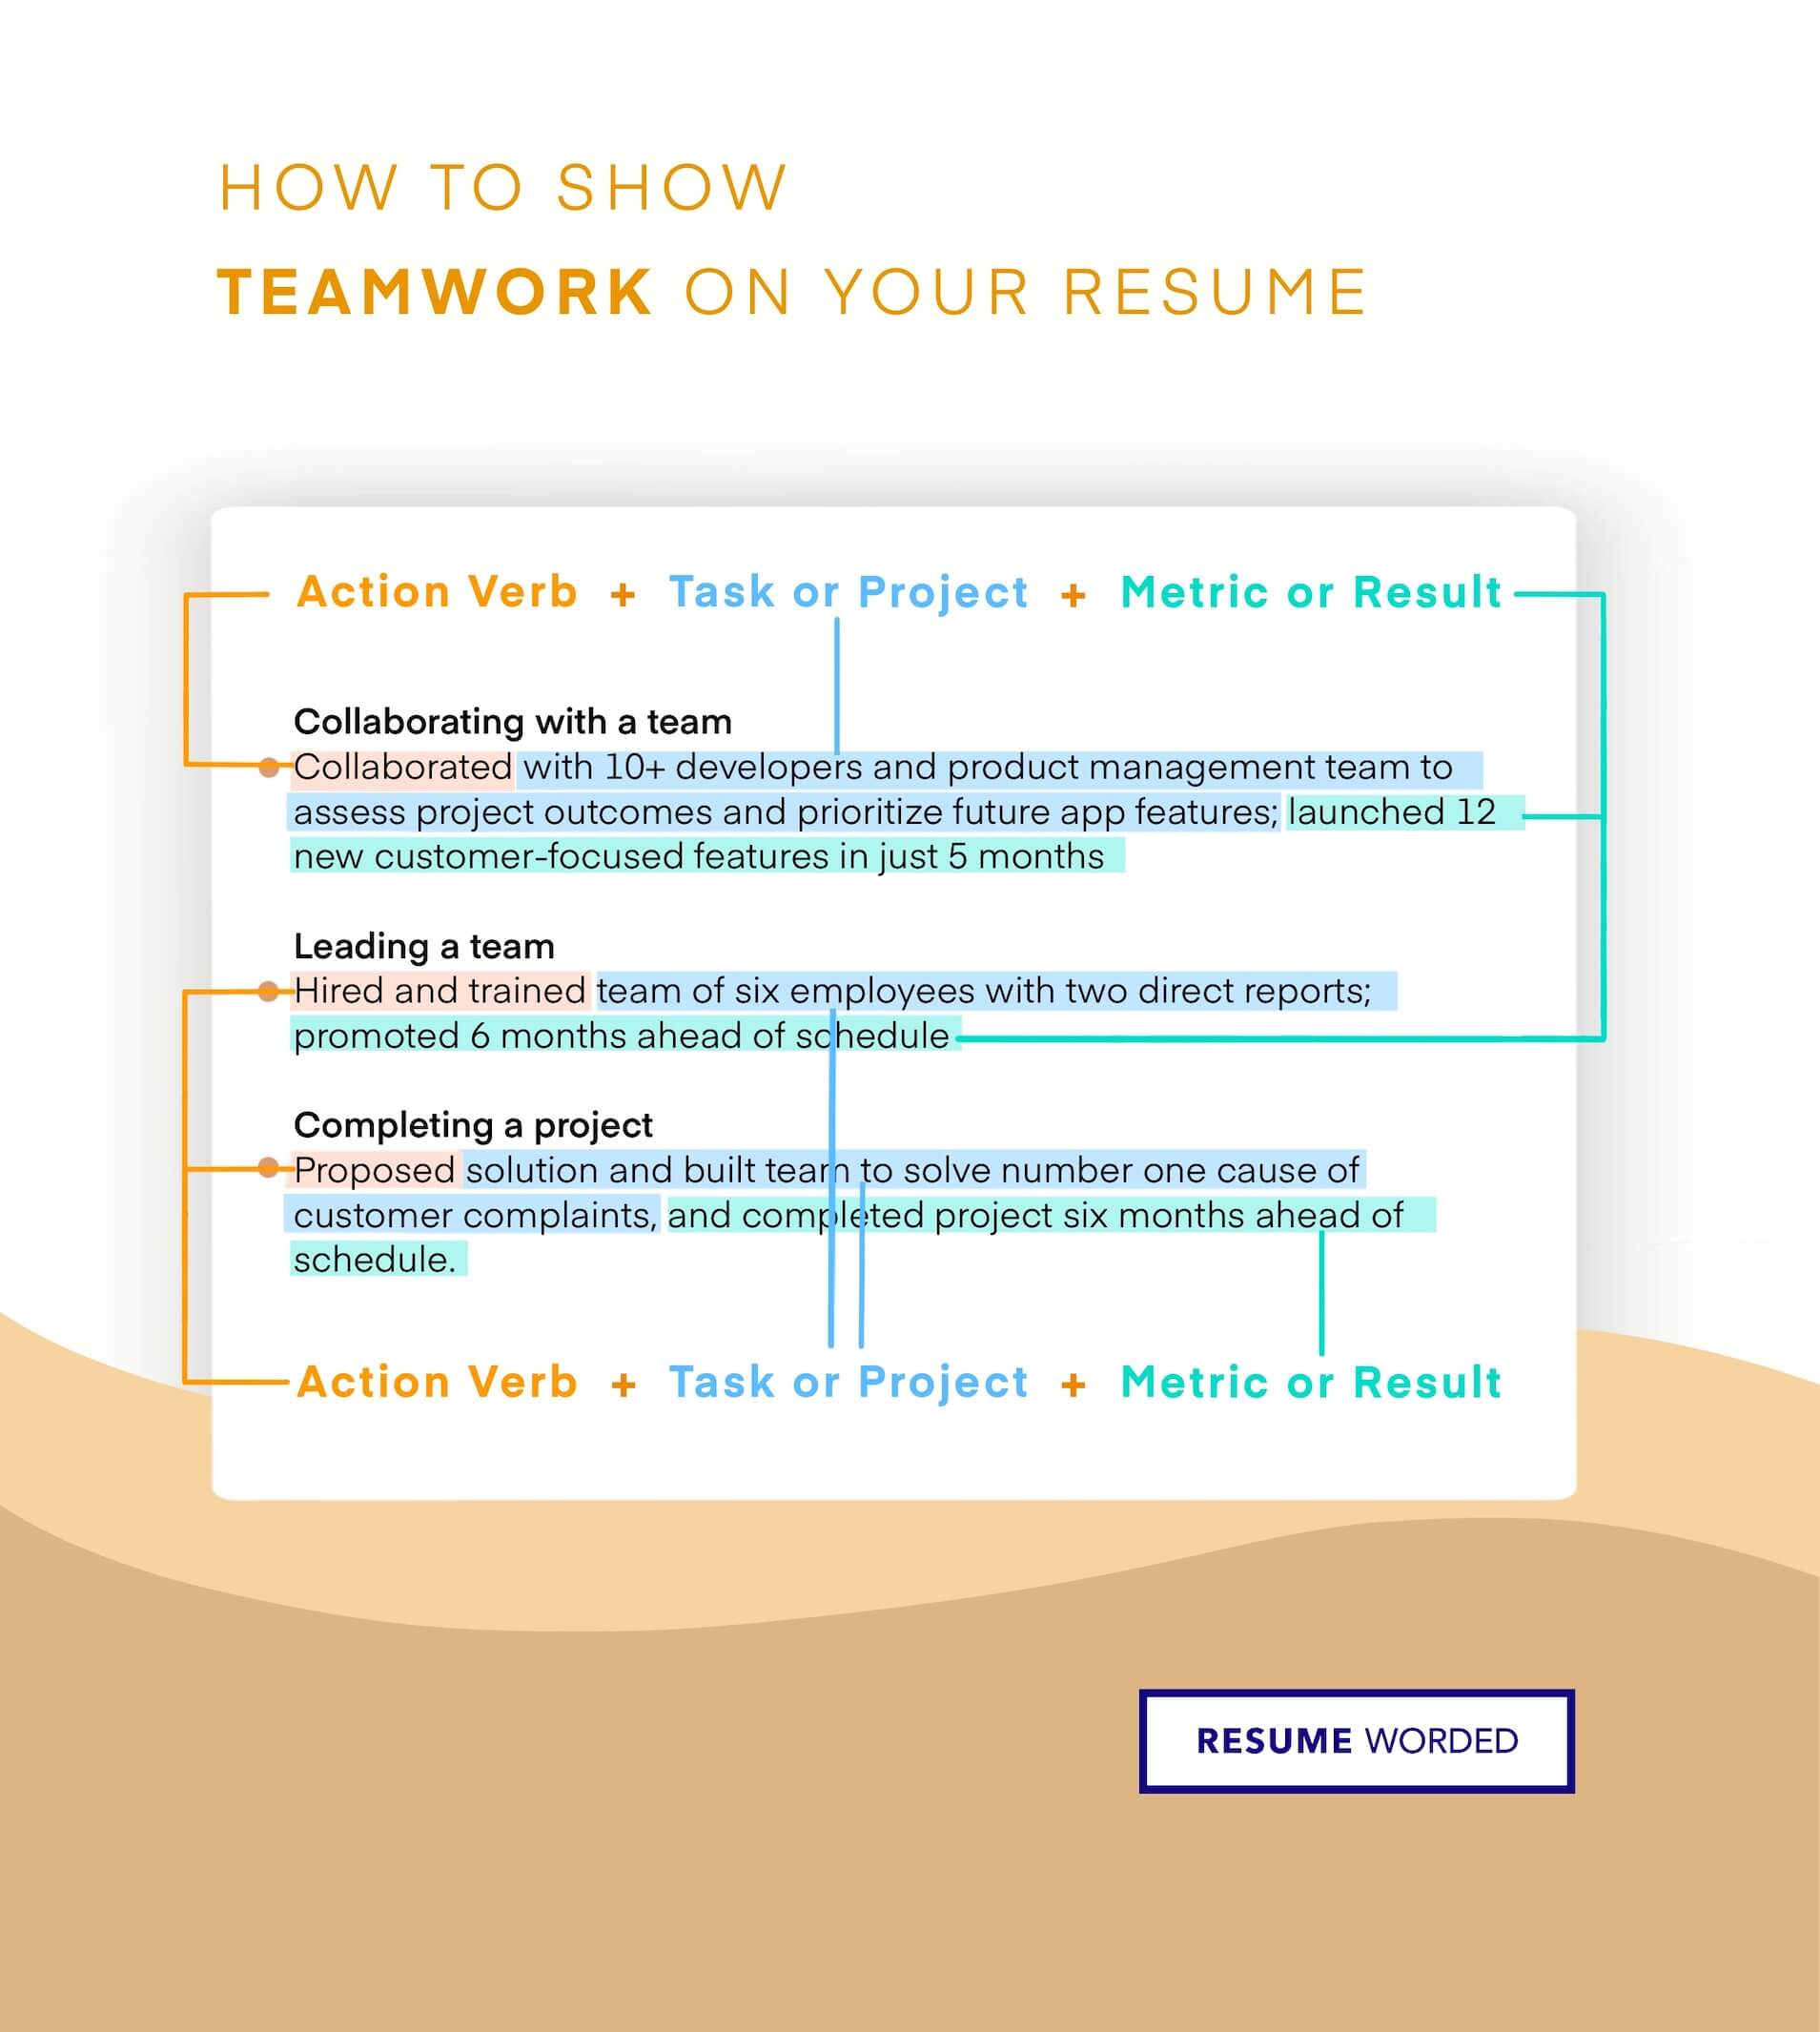 Demonstrate your ability to coordinate with team members. - AngularJS Developer Resume